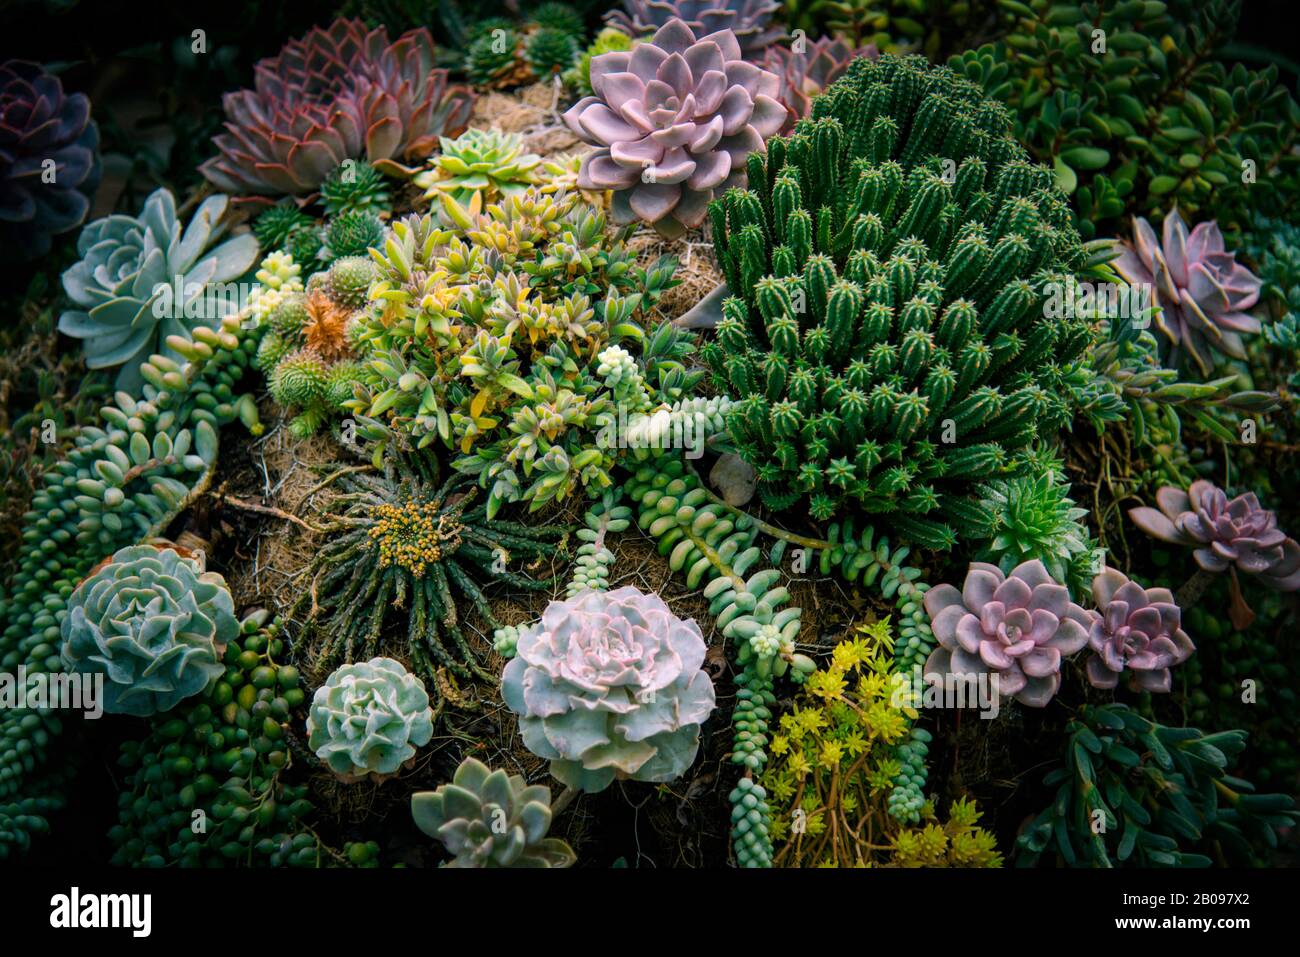 Tropical green succulents as a natural background. Stock Photo